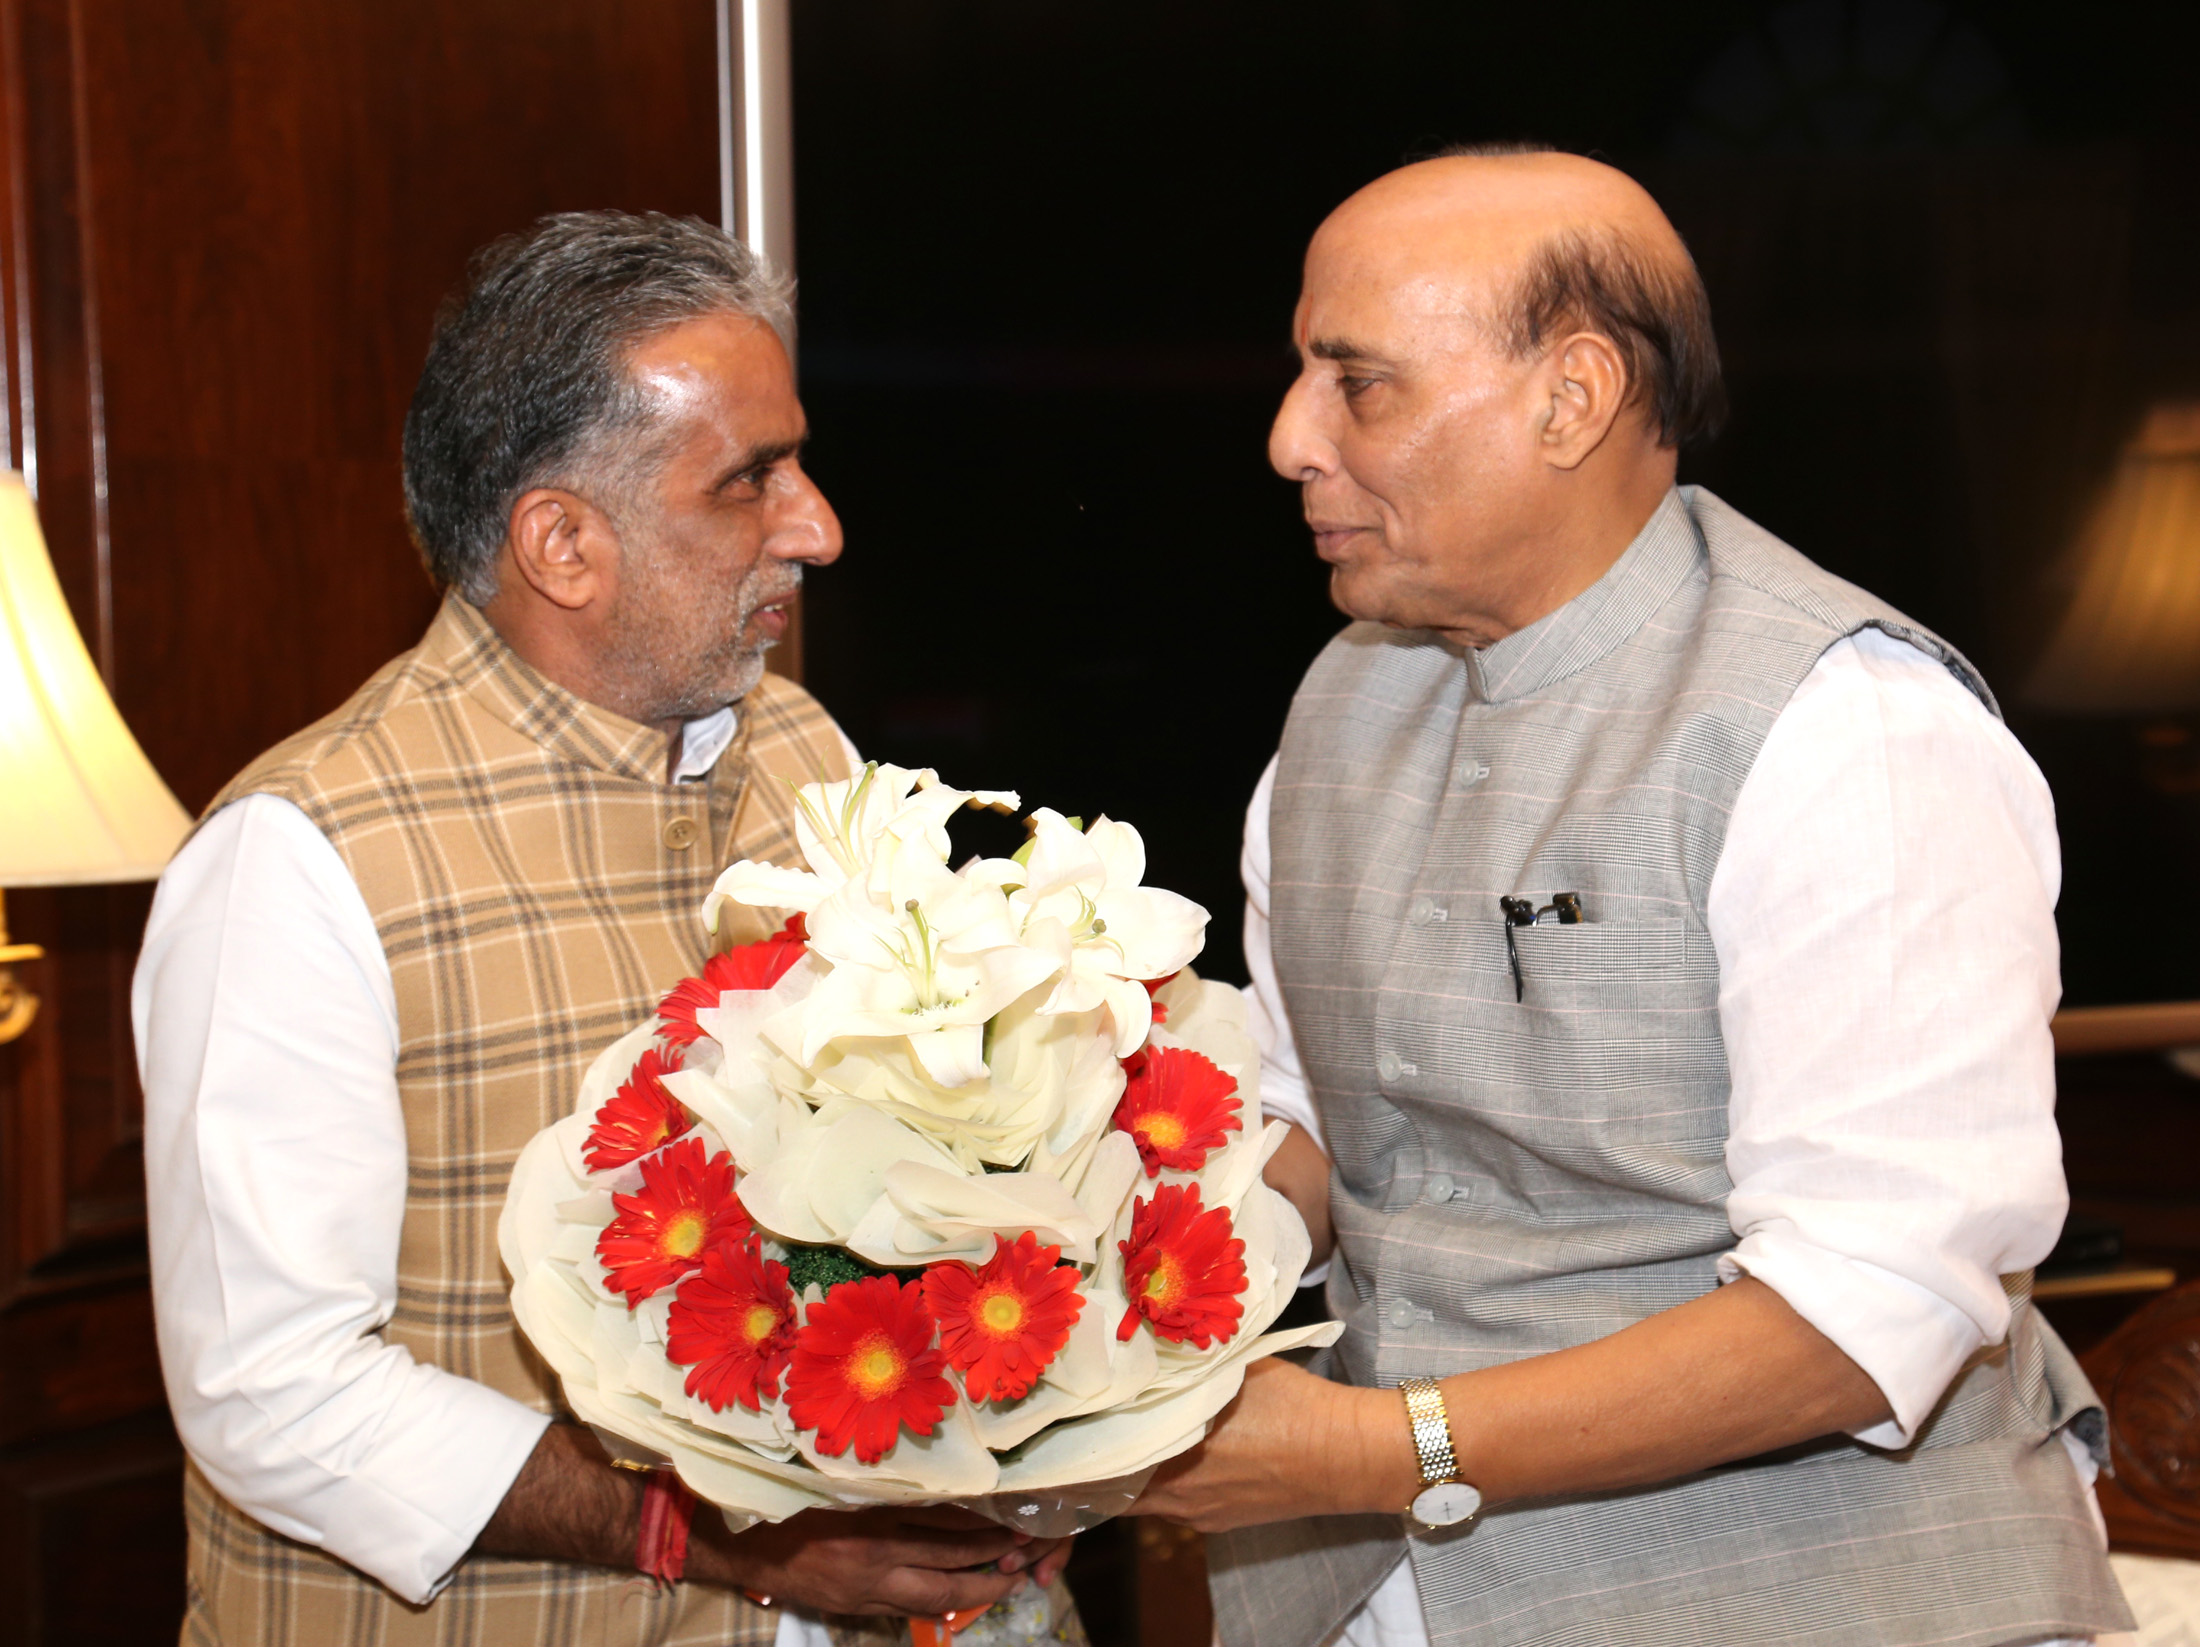 The Minister of State for Social Justice & Empowerment, Shri Krishan Pal calling on the Union Home Minister, Shri Rajnath Singh, in New Delhi on October 27, 2016,